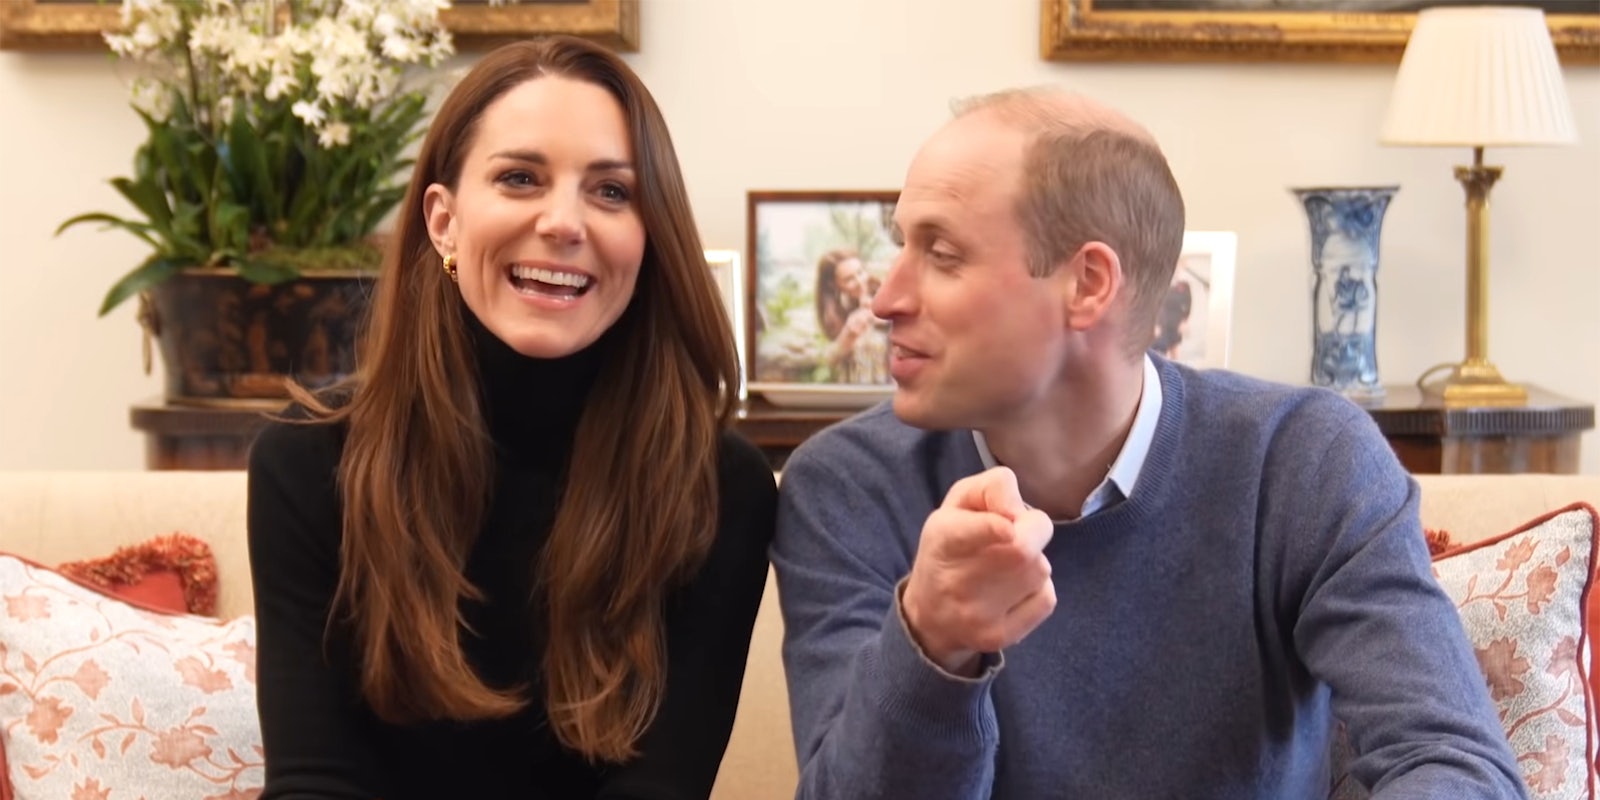 Princess Kate and Prince William on couch